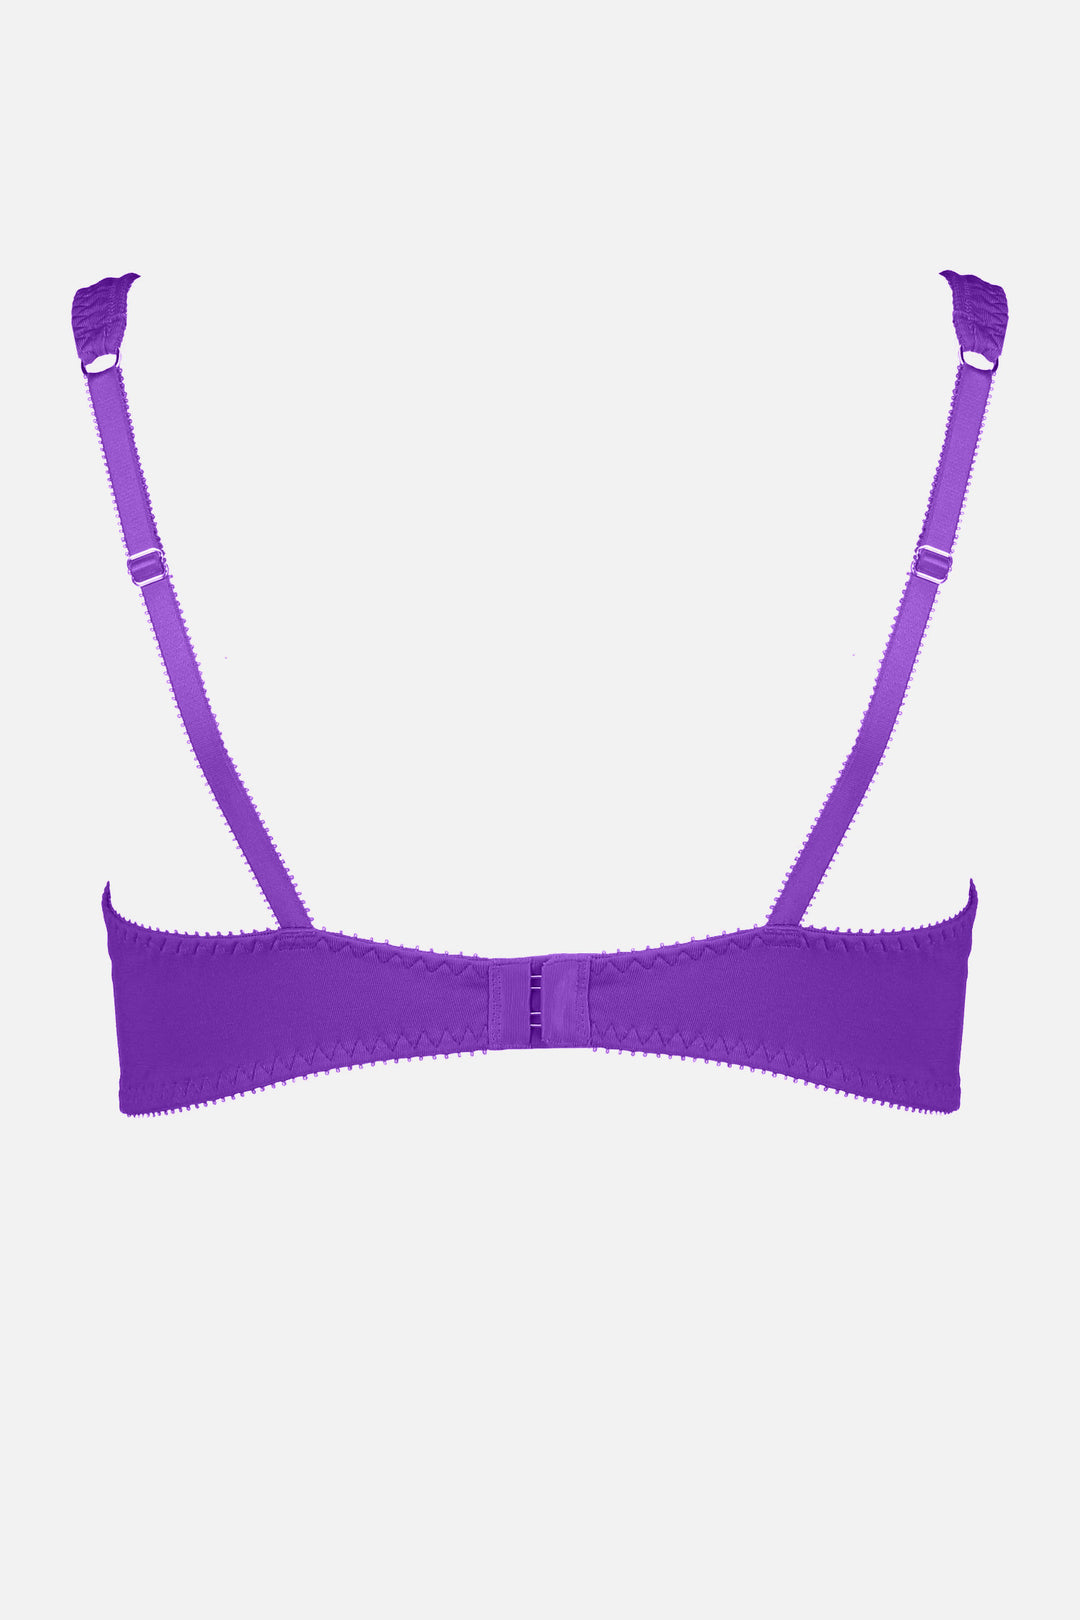 Videris Lingerie Sarah underwire free soft cup bra in purple TENCEL™ features adjustable back straps and hook and eyes closure